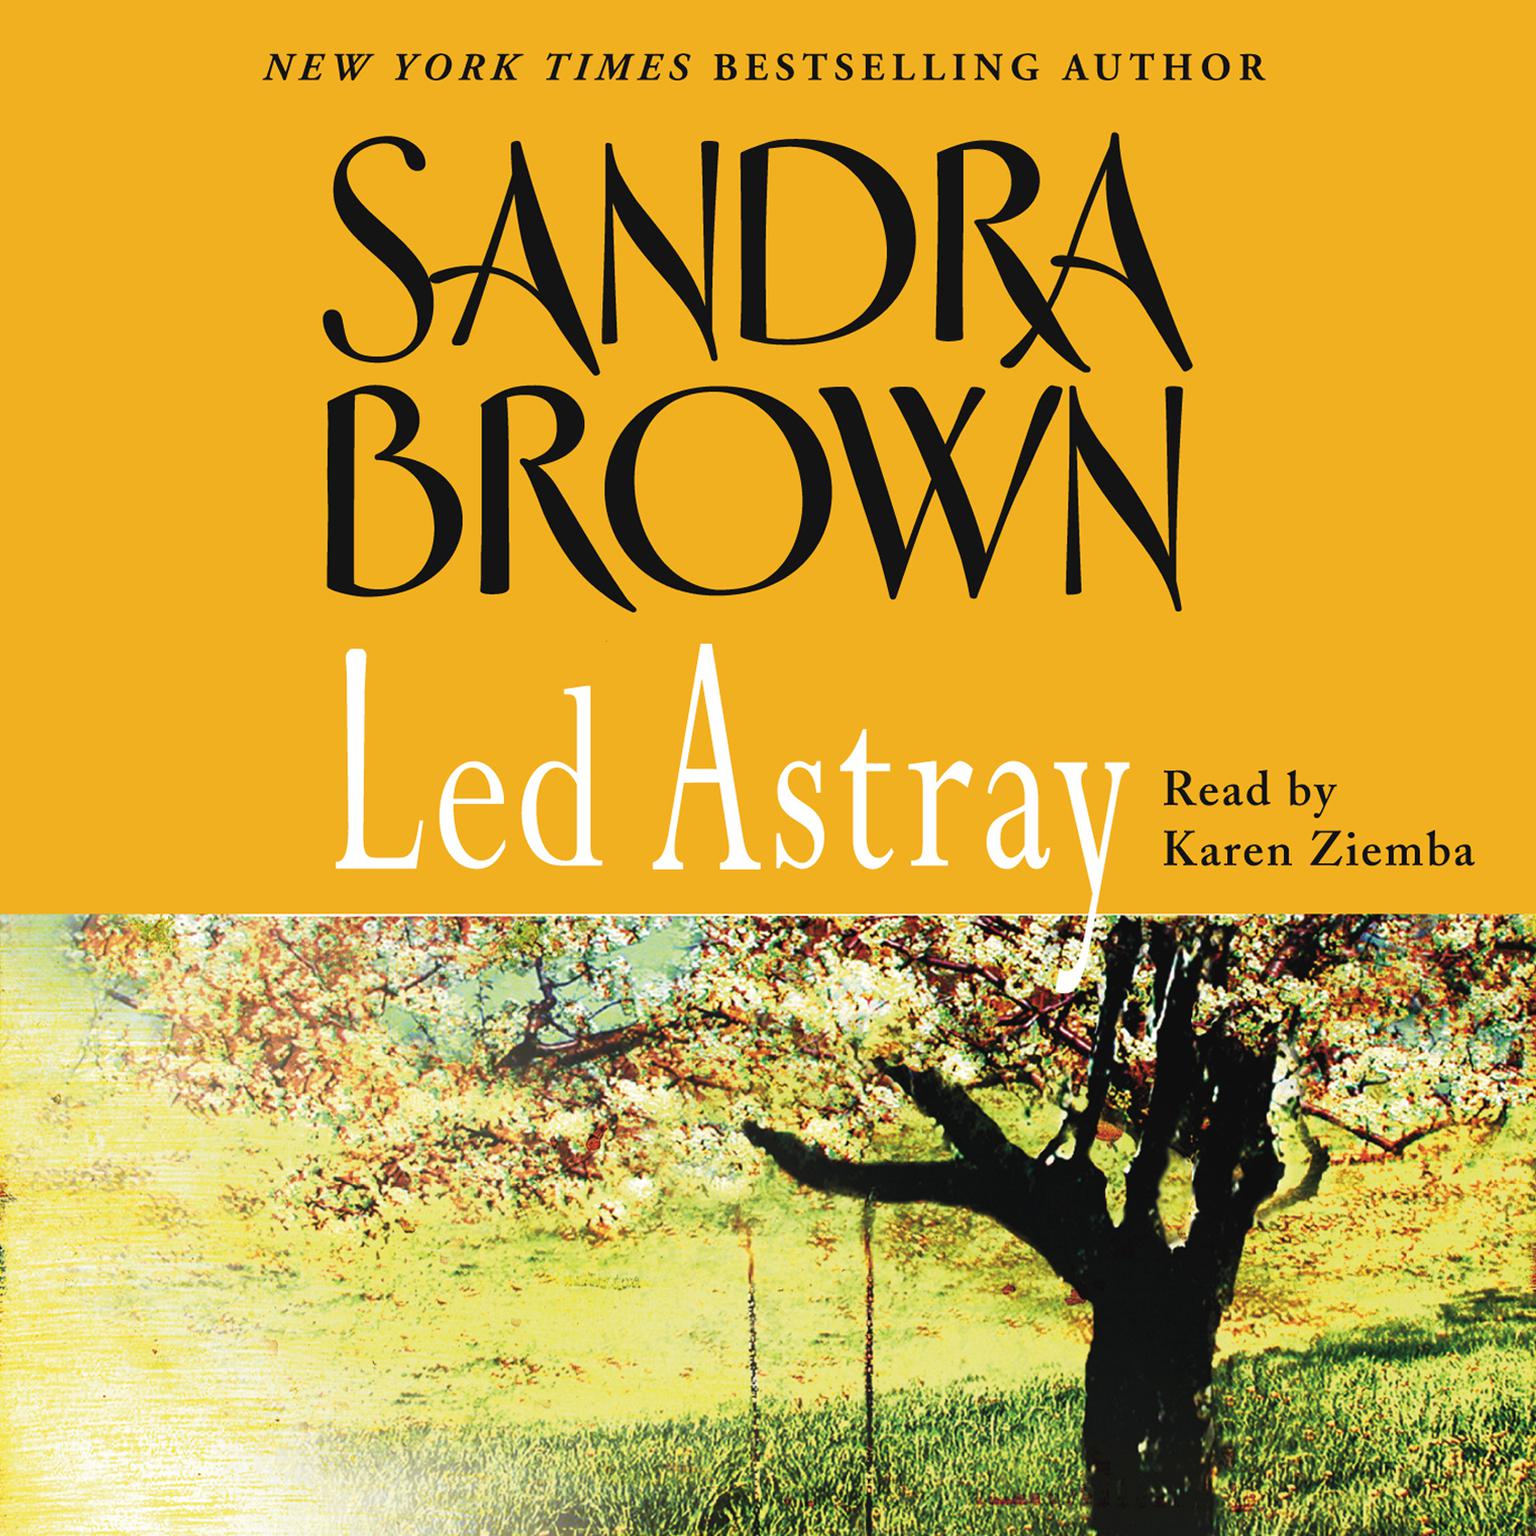 Led Astray (Abridged) Audiobook, by Sandra Brown